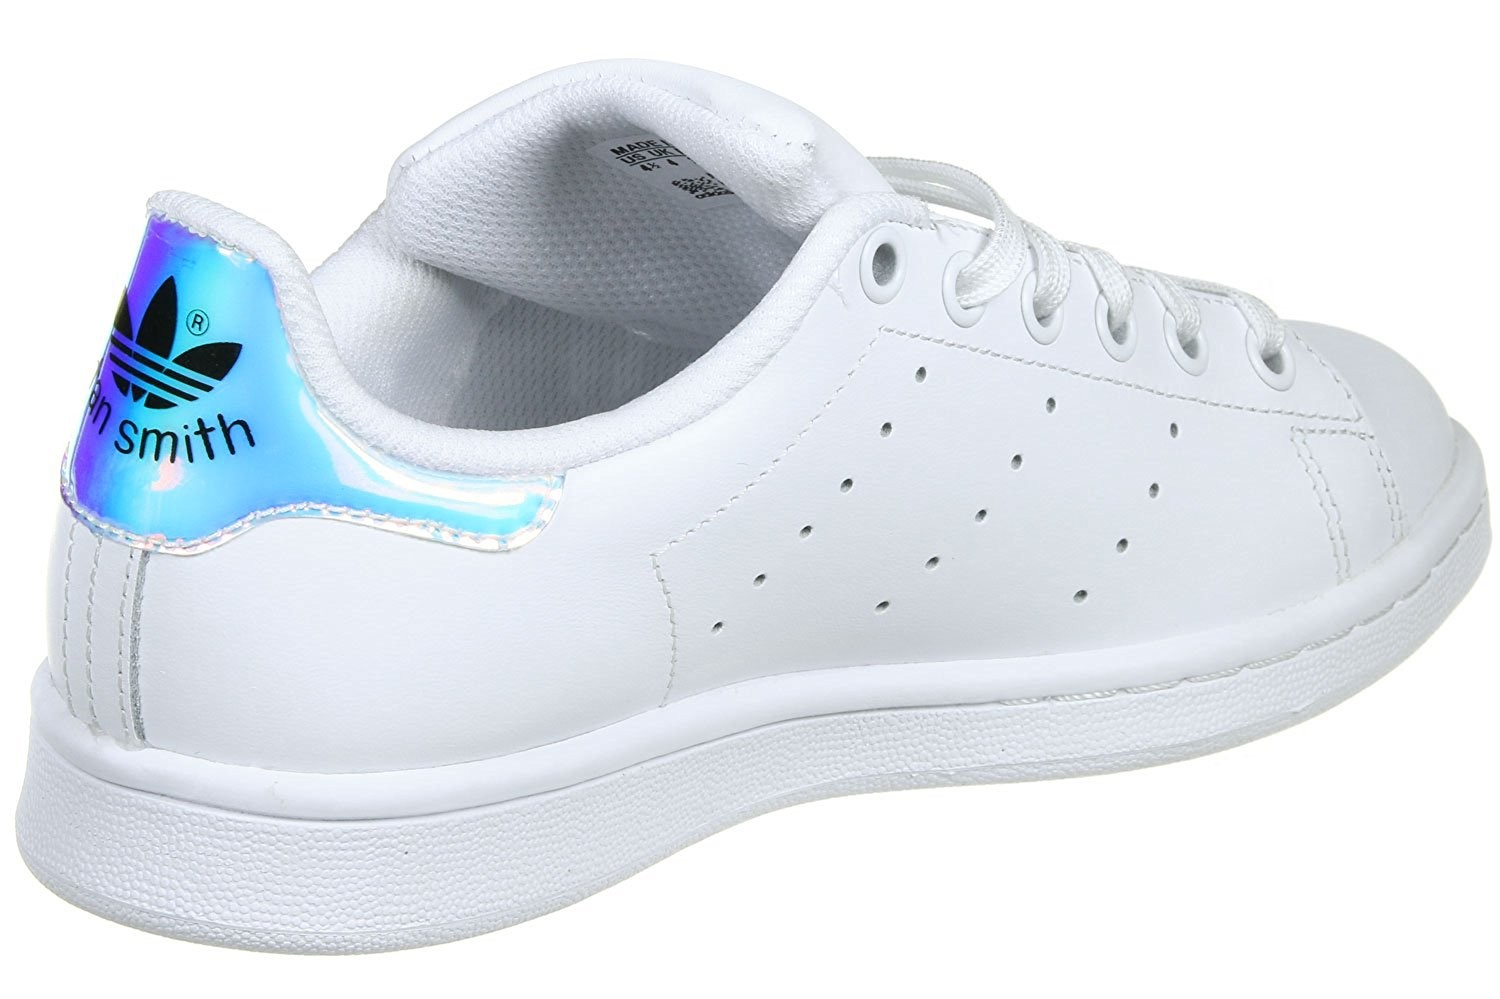 chaussures adidas fille 35